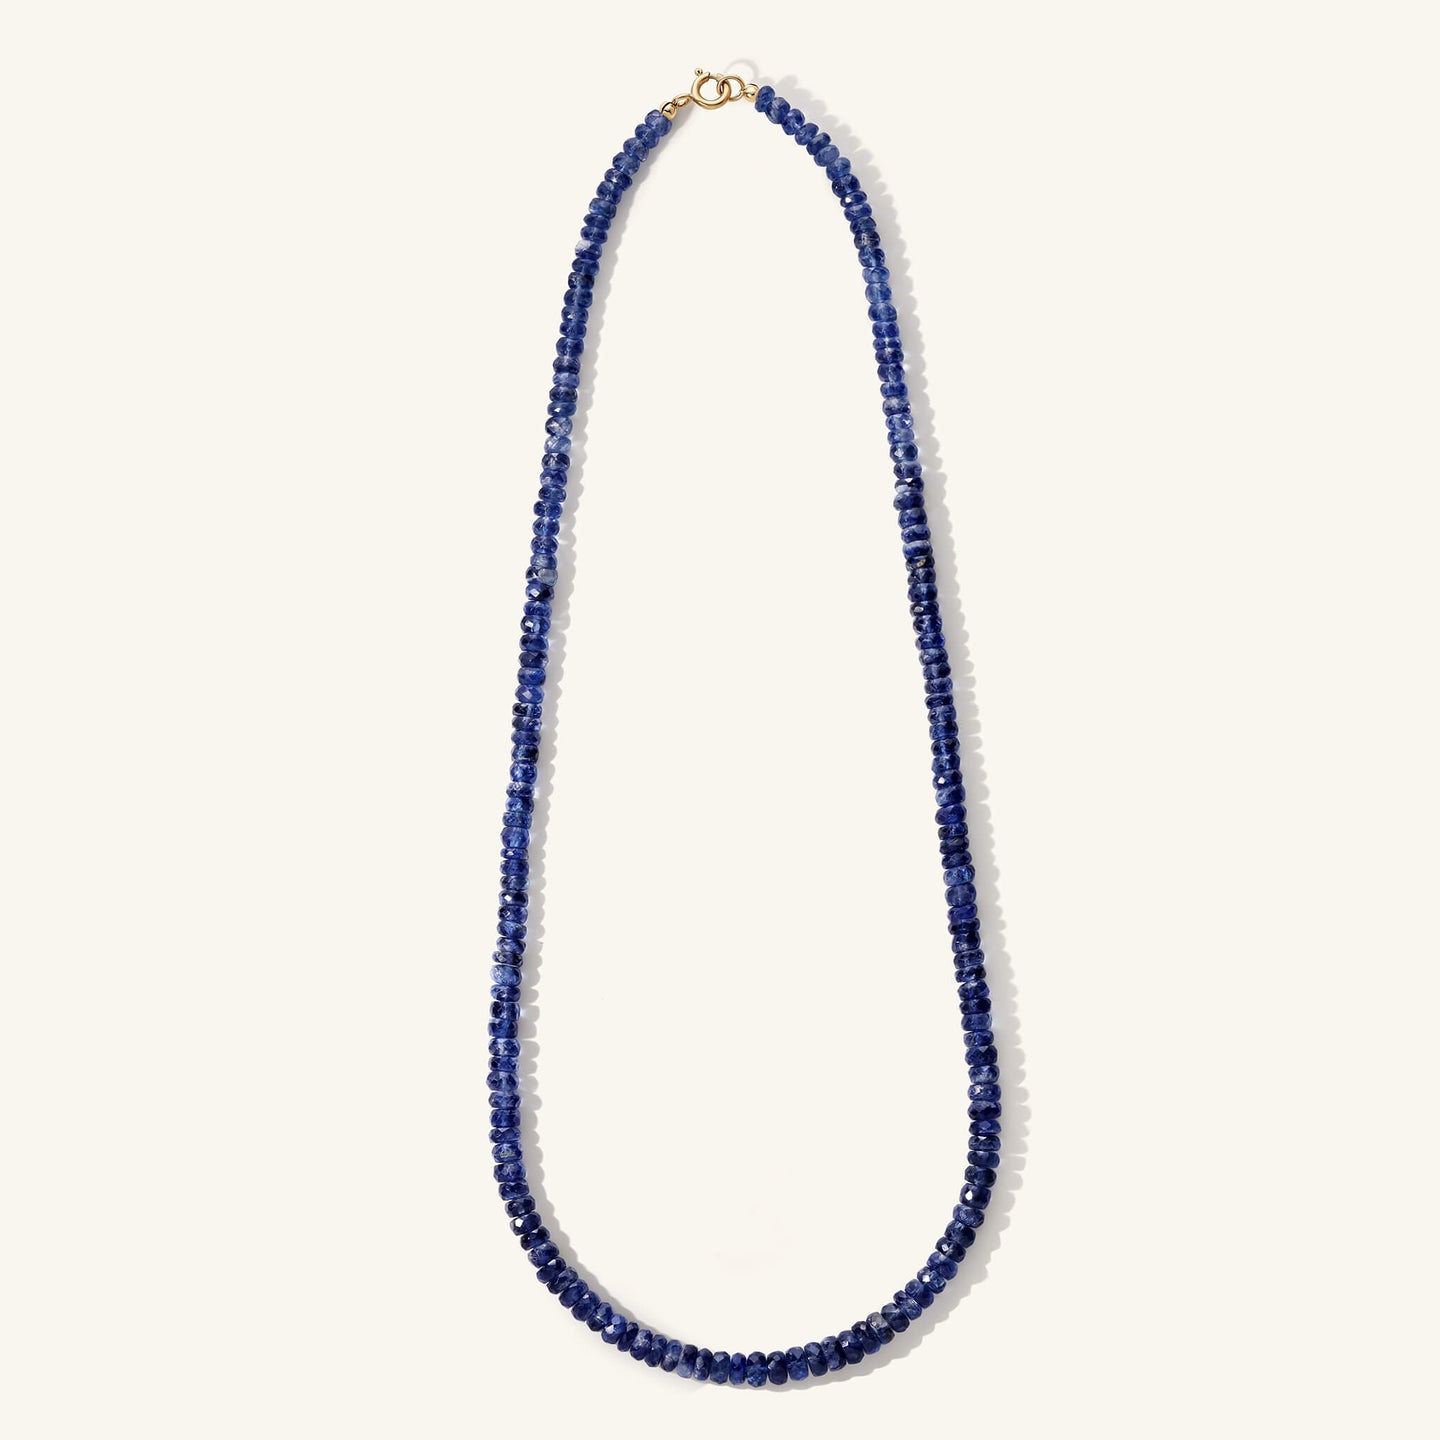 Faceted Kyanite Necklace